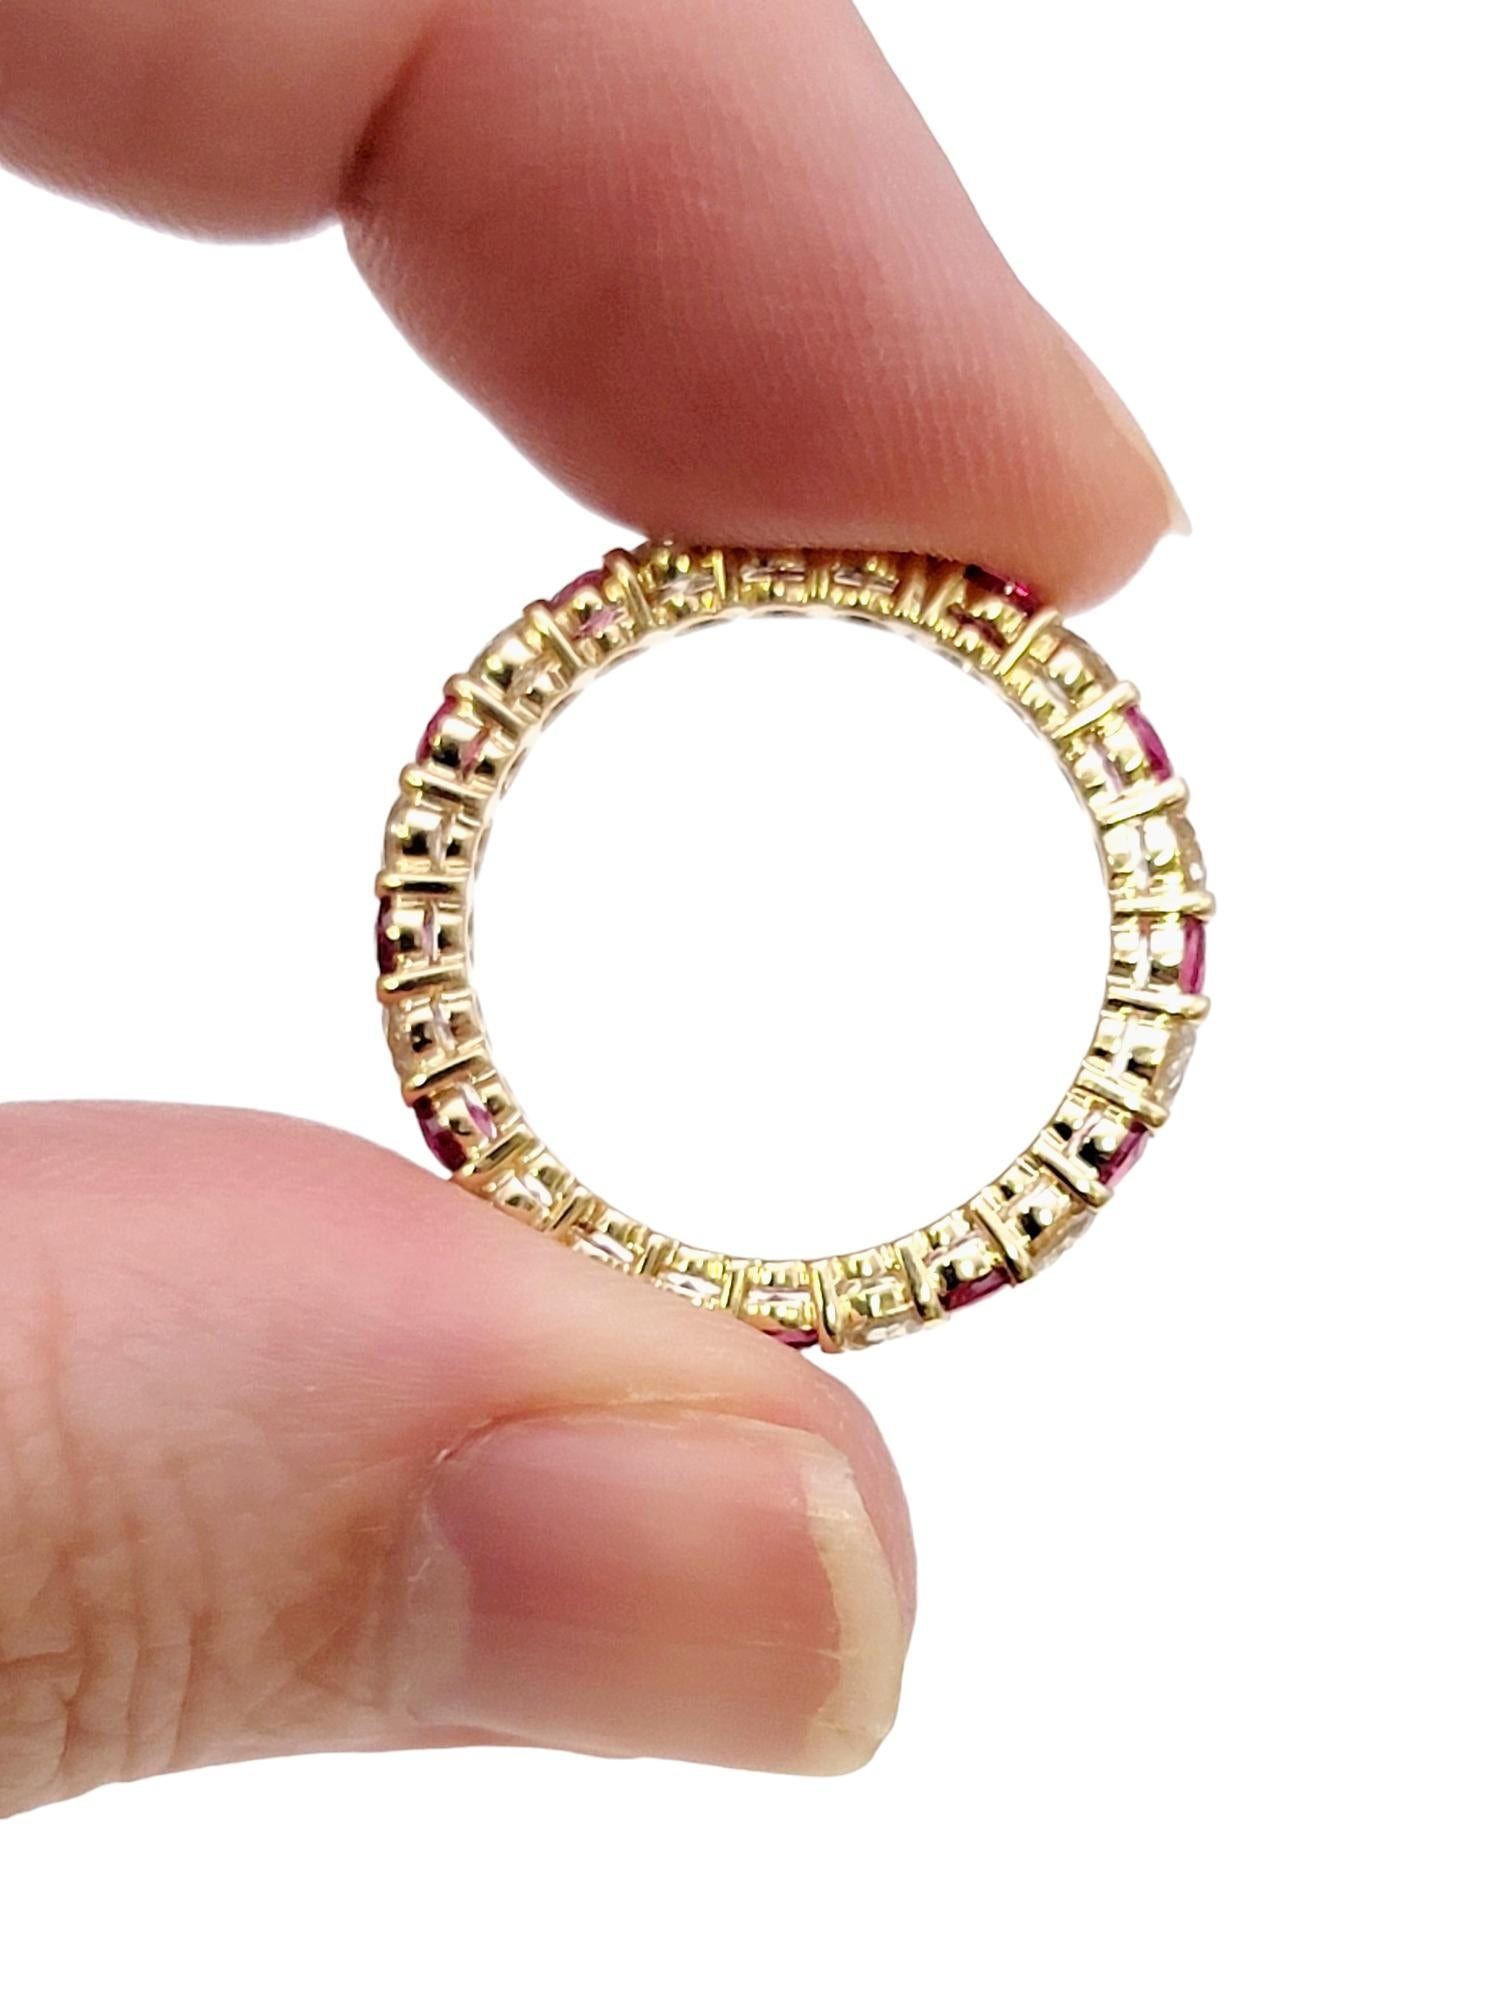 Women's Alternating Ruby and Diamond Eternity Band Ring in 14 Karat Yellow Gold Size 6 For Sale